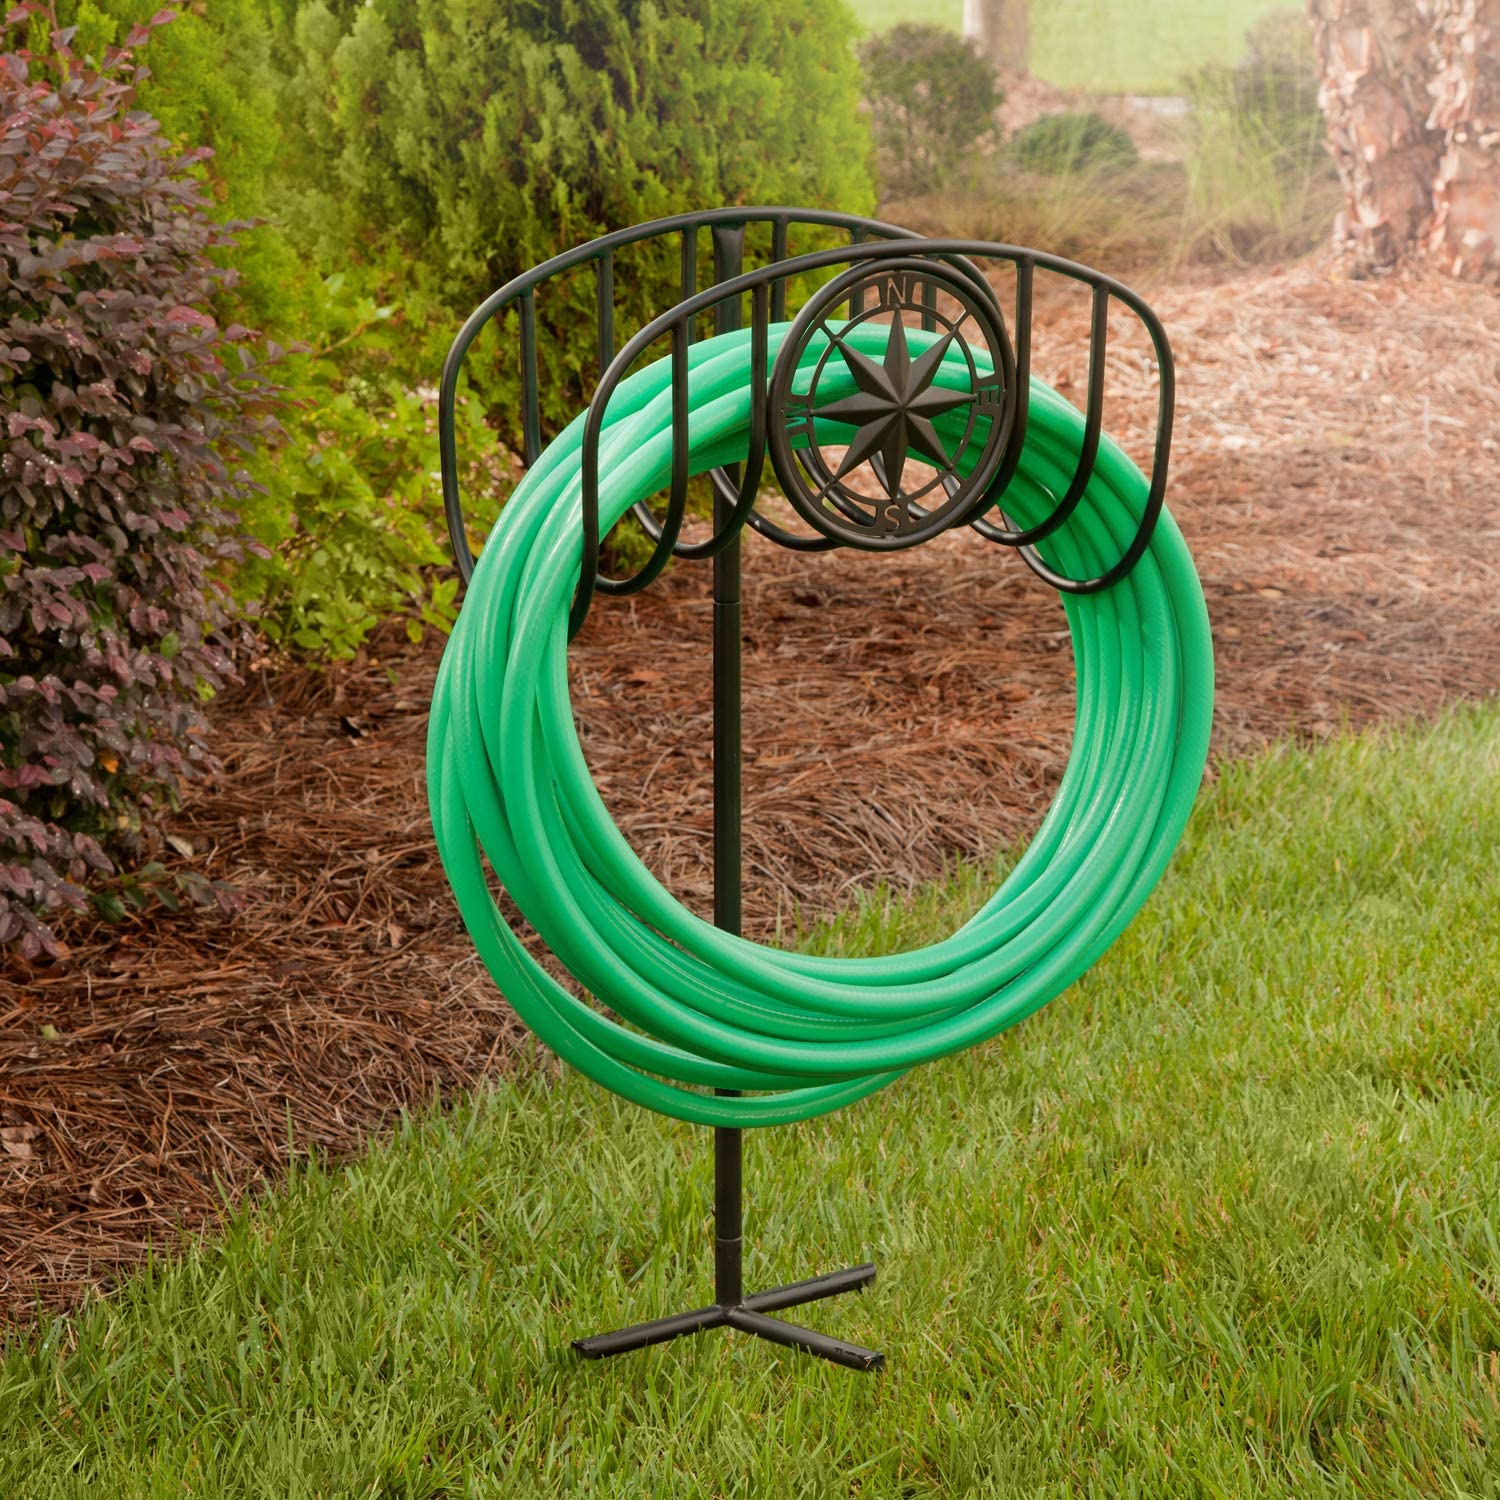 Liberty Garden Americana hose stand Steel 125-ft Stand Hose Reel